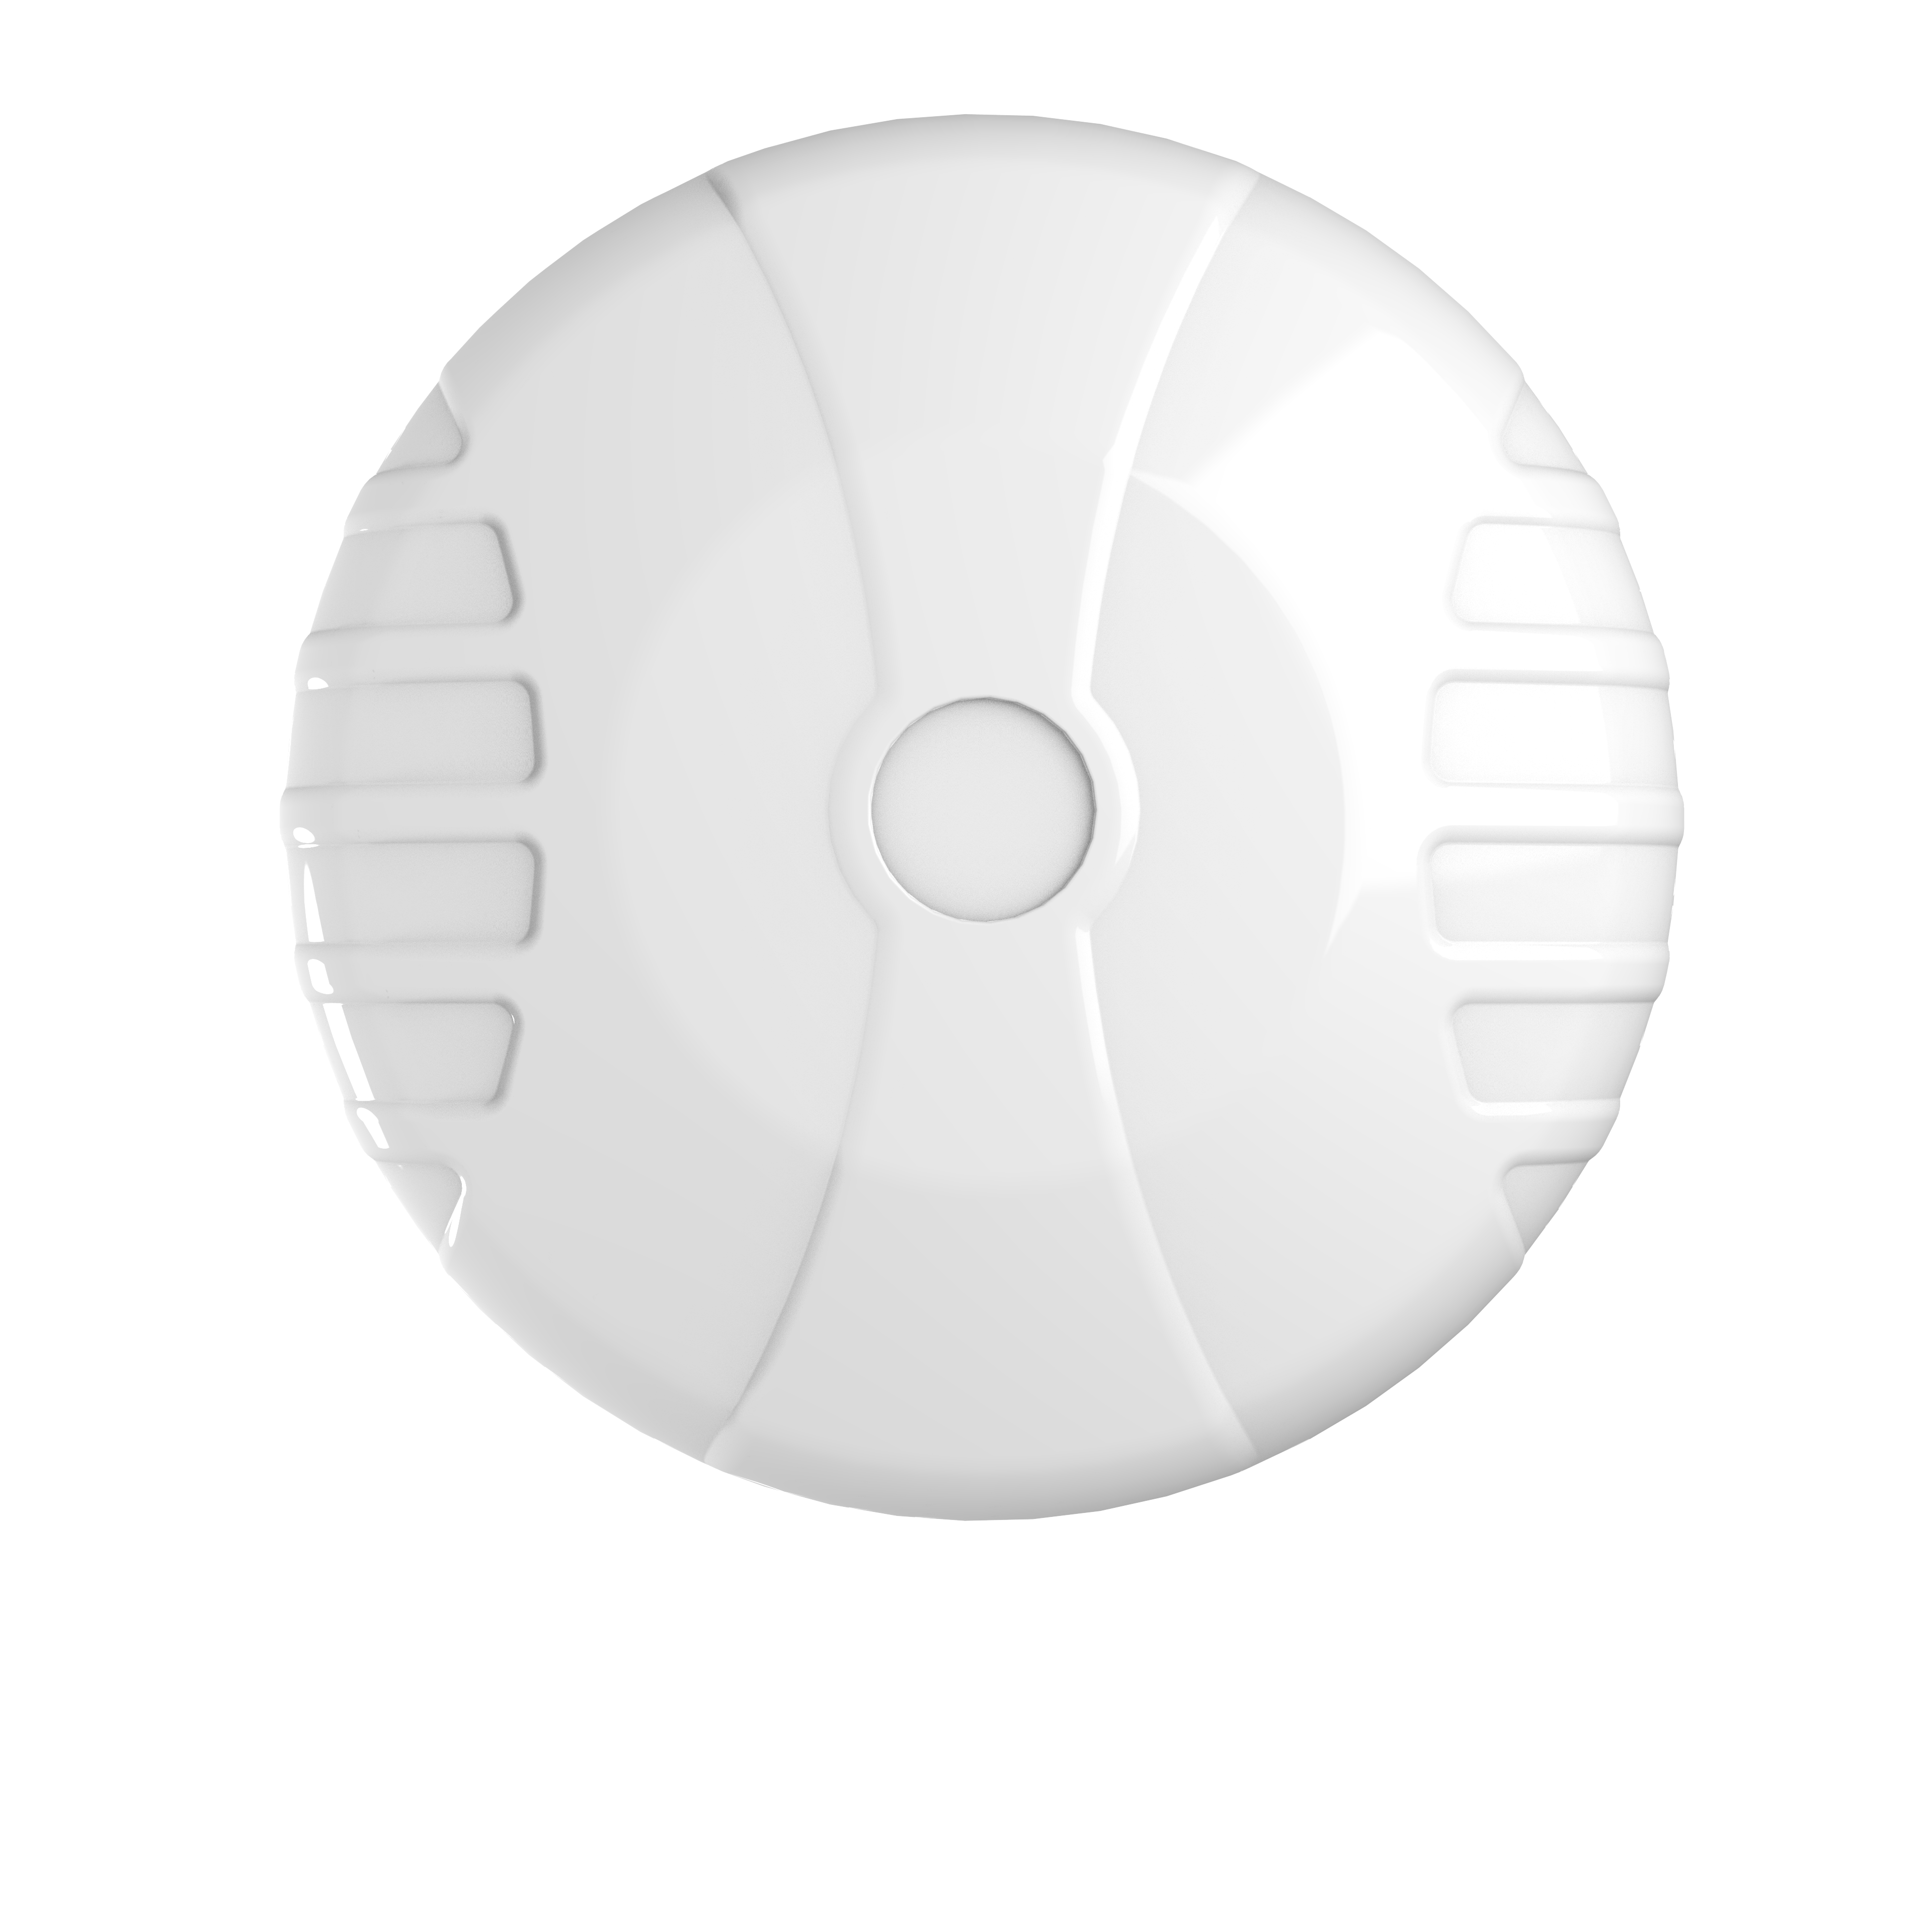 a-ripl-0016-top-view.png